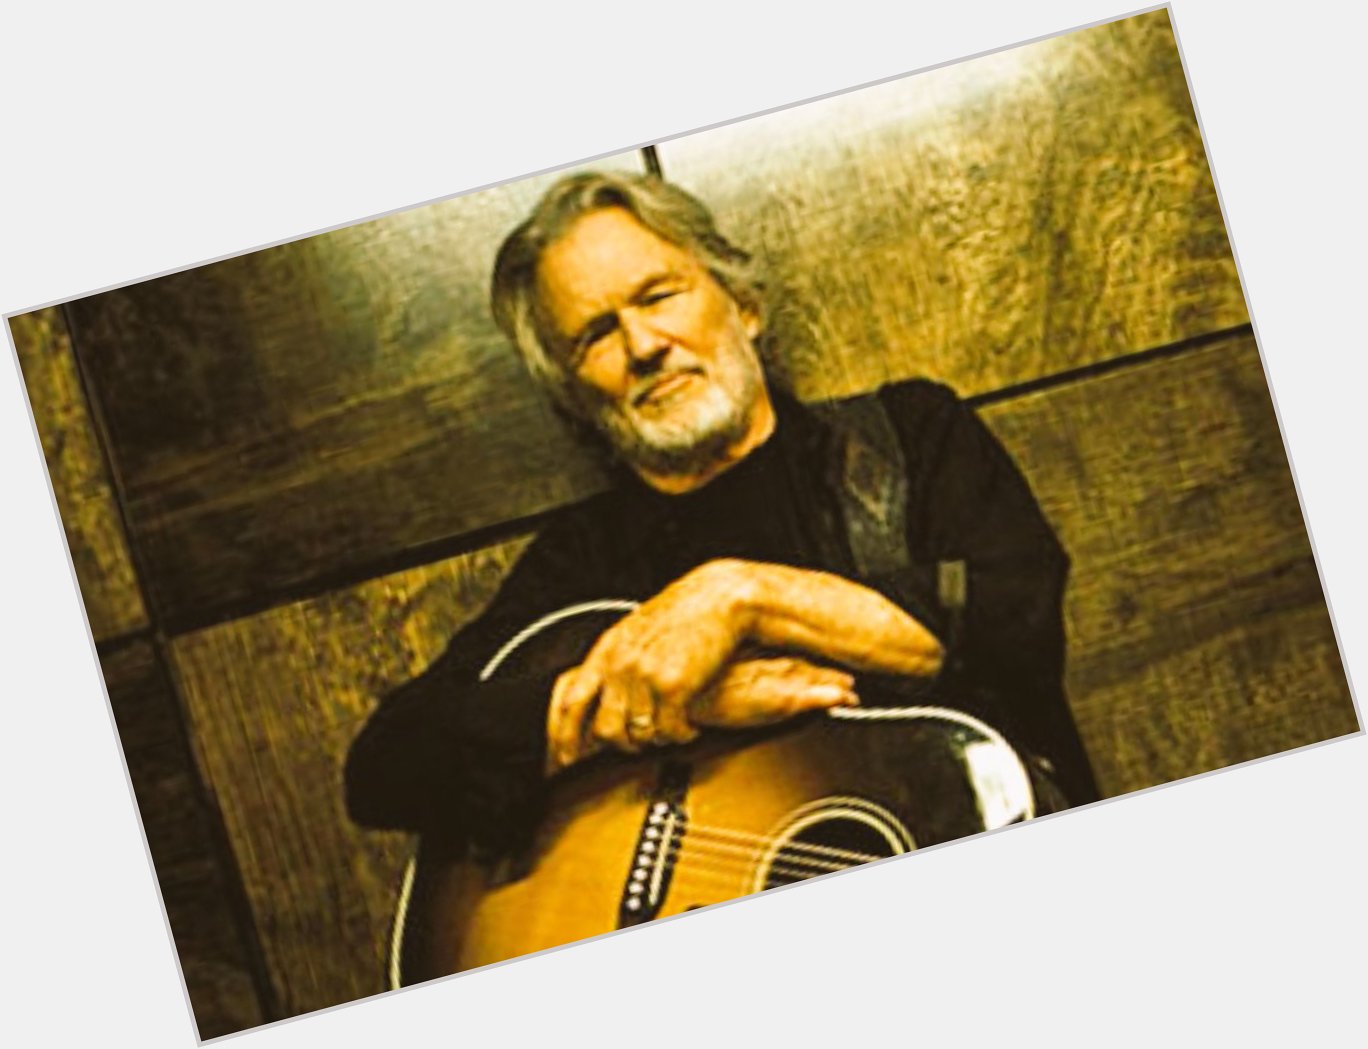 Happy birthday Kris Kristofferson - another of the great songwriters    